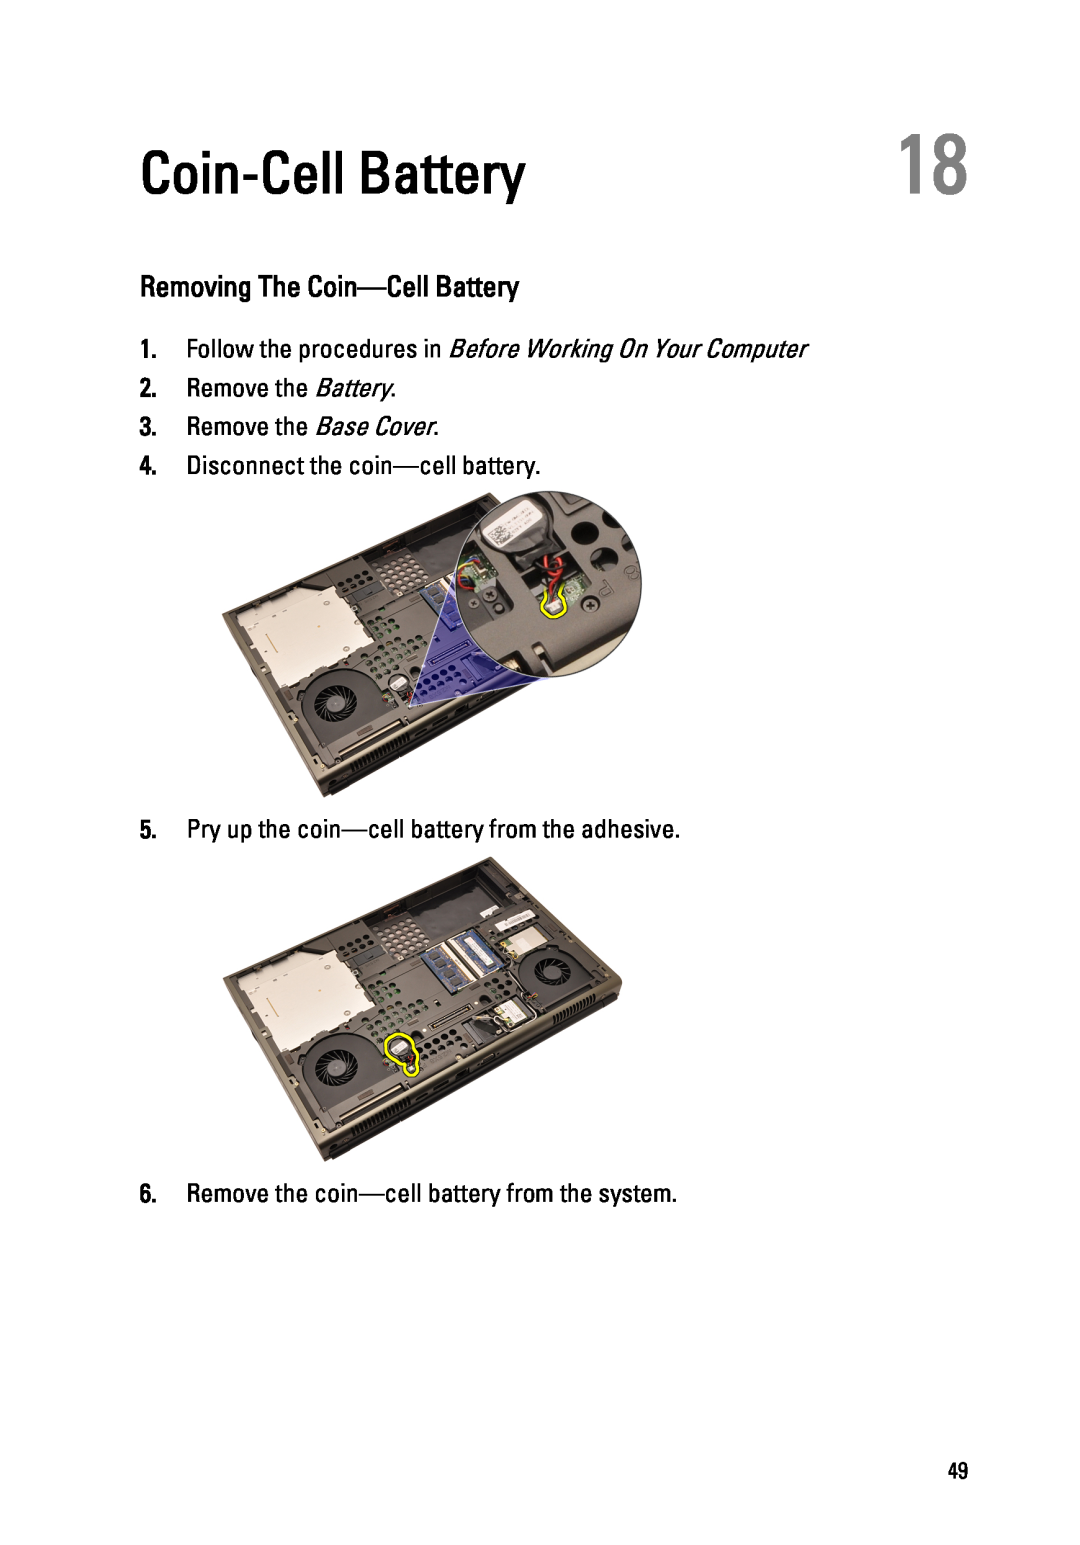 Dell M4600 owner manual Removing The Coin-Cell Battery, Disconnect the coin-cell battery 